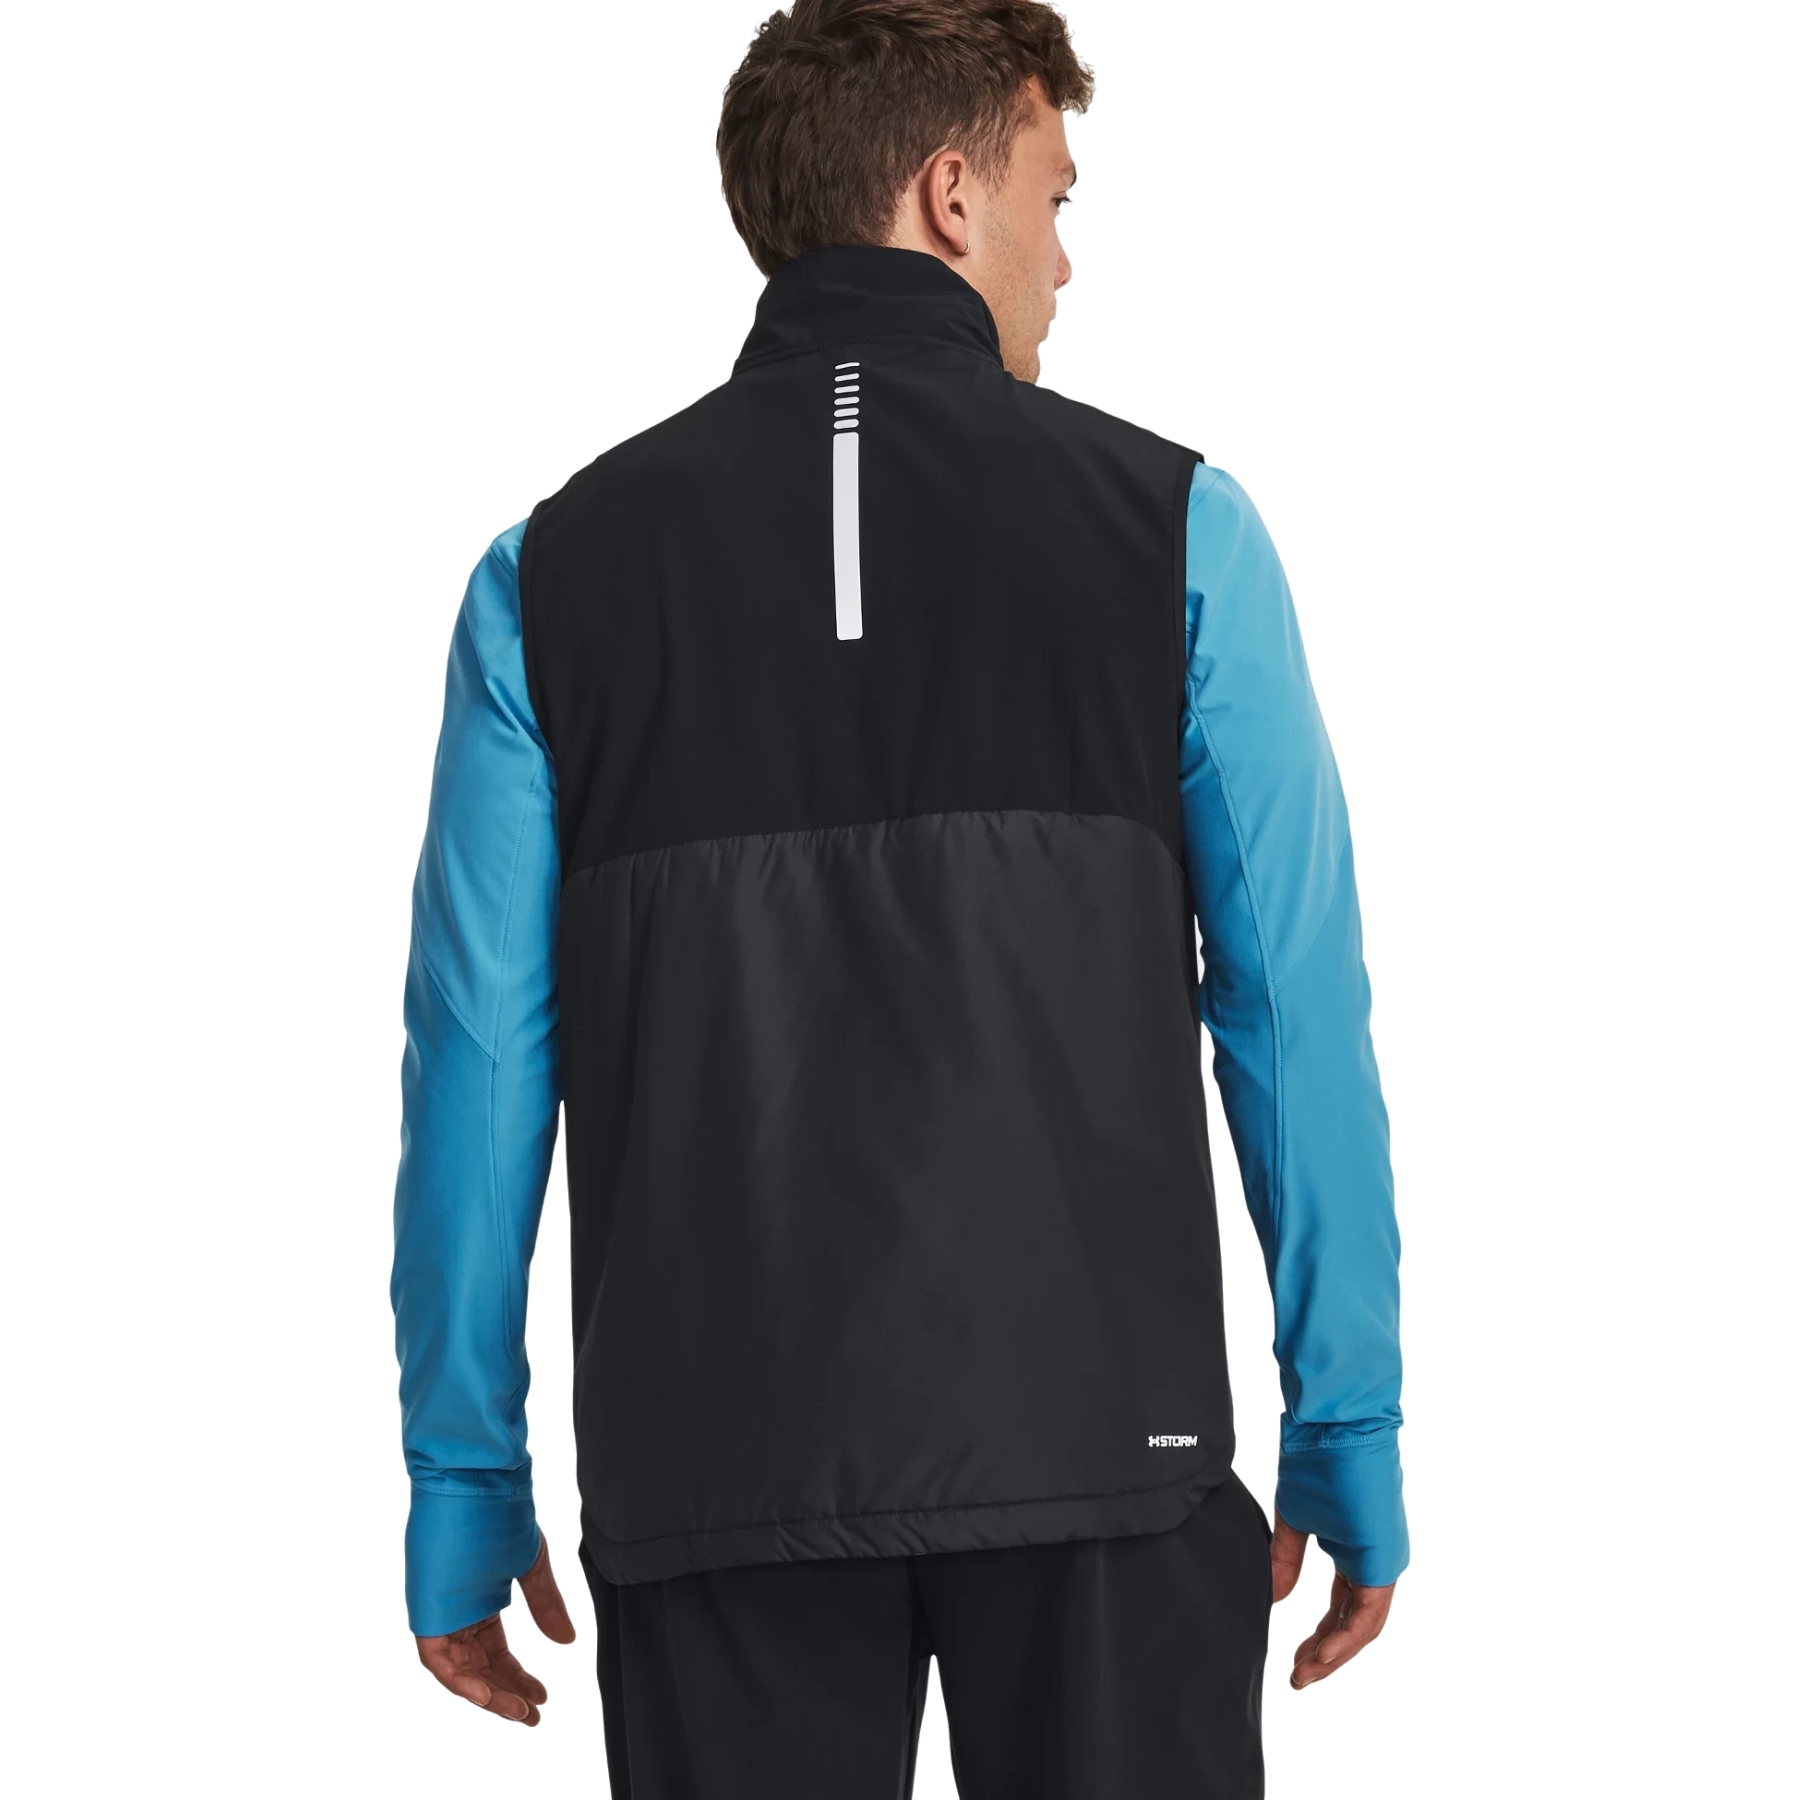 Under Armour Storm Insulated Chaleco - Black